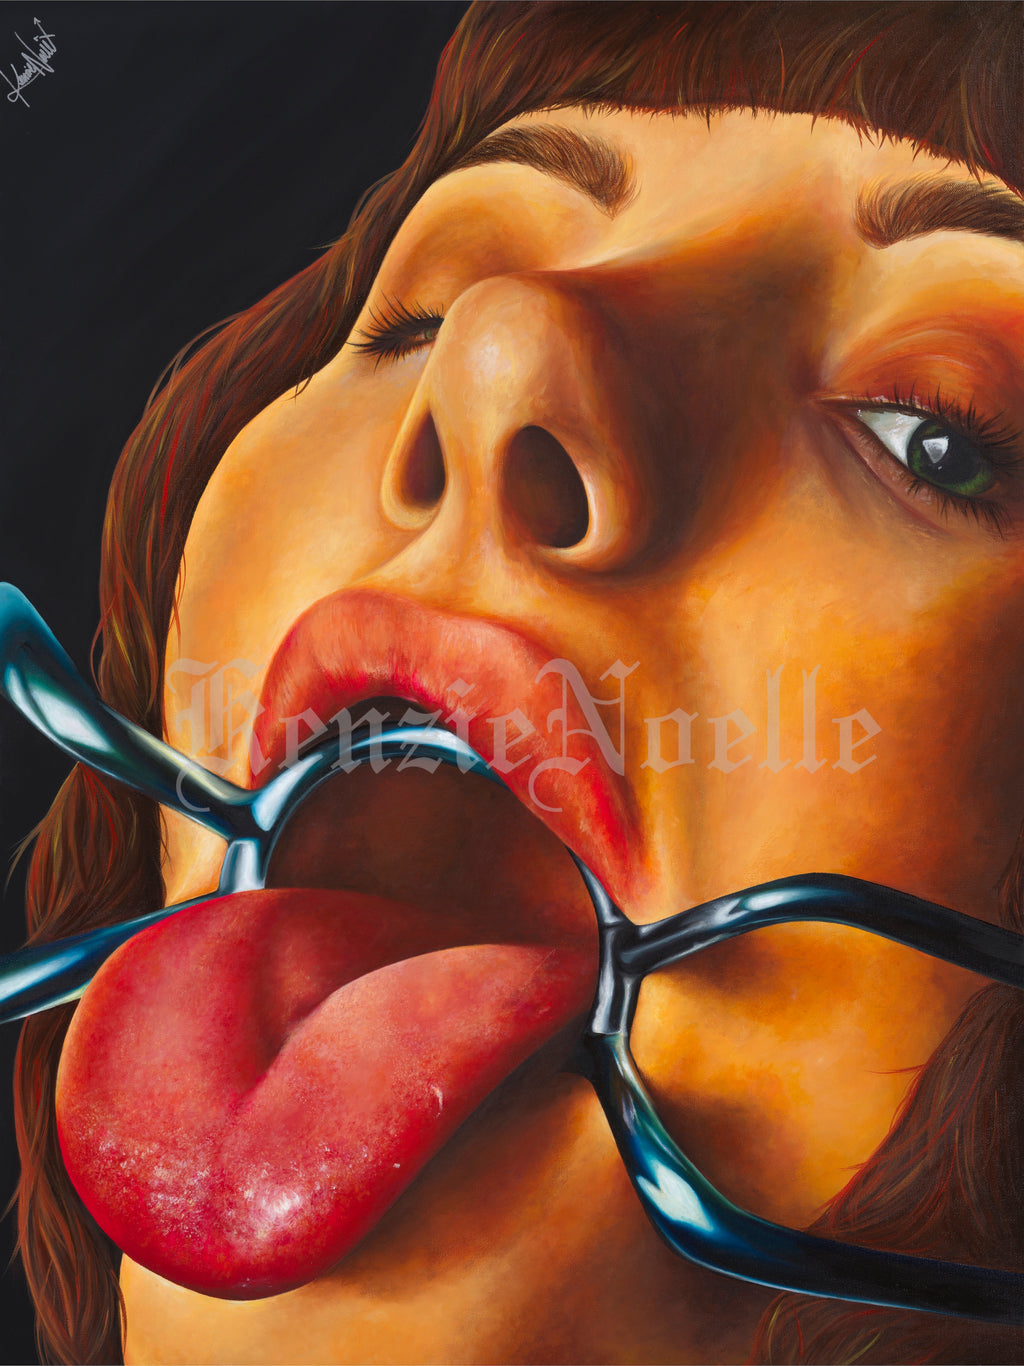 CLOSED MOUTHS DON'T GET FED original painting